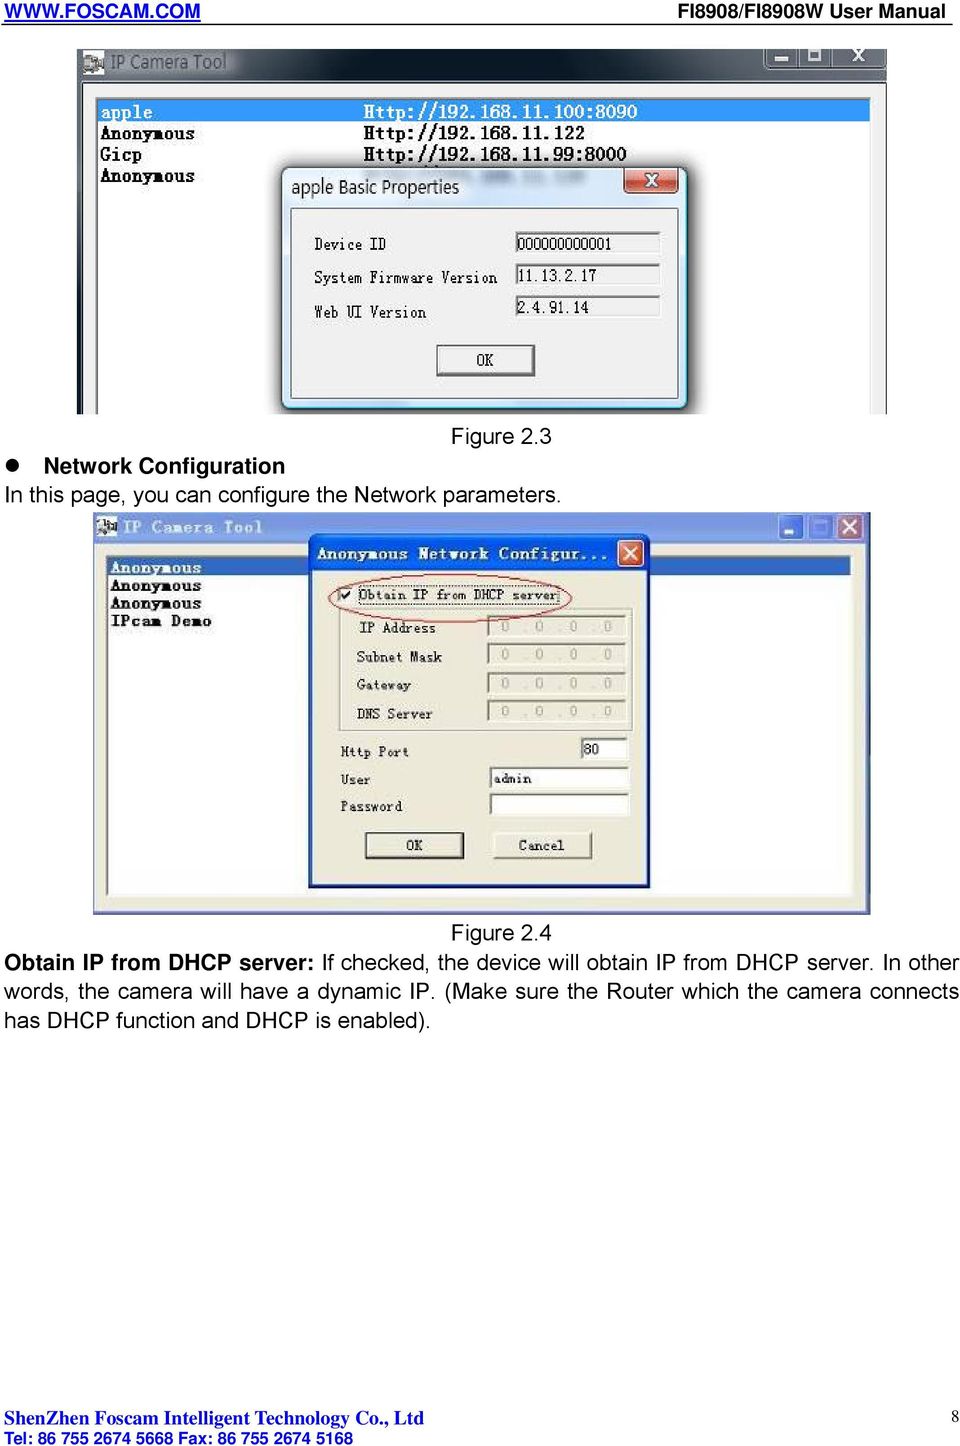 4 Obtain IP from DHCP server: If checked, the device will obtain IP from DHCP